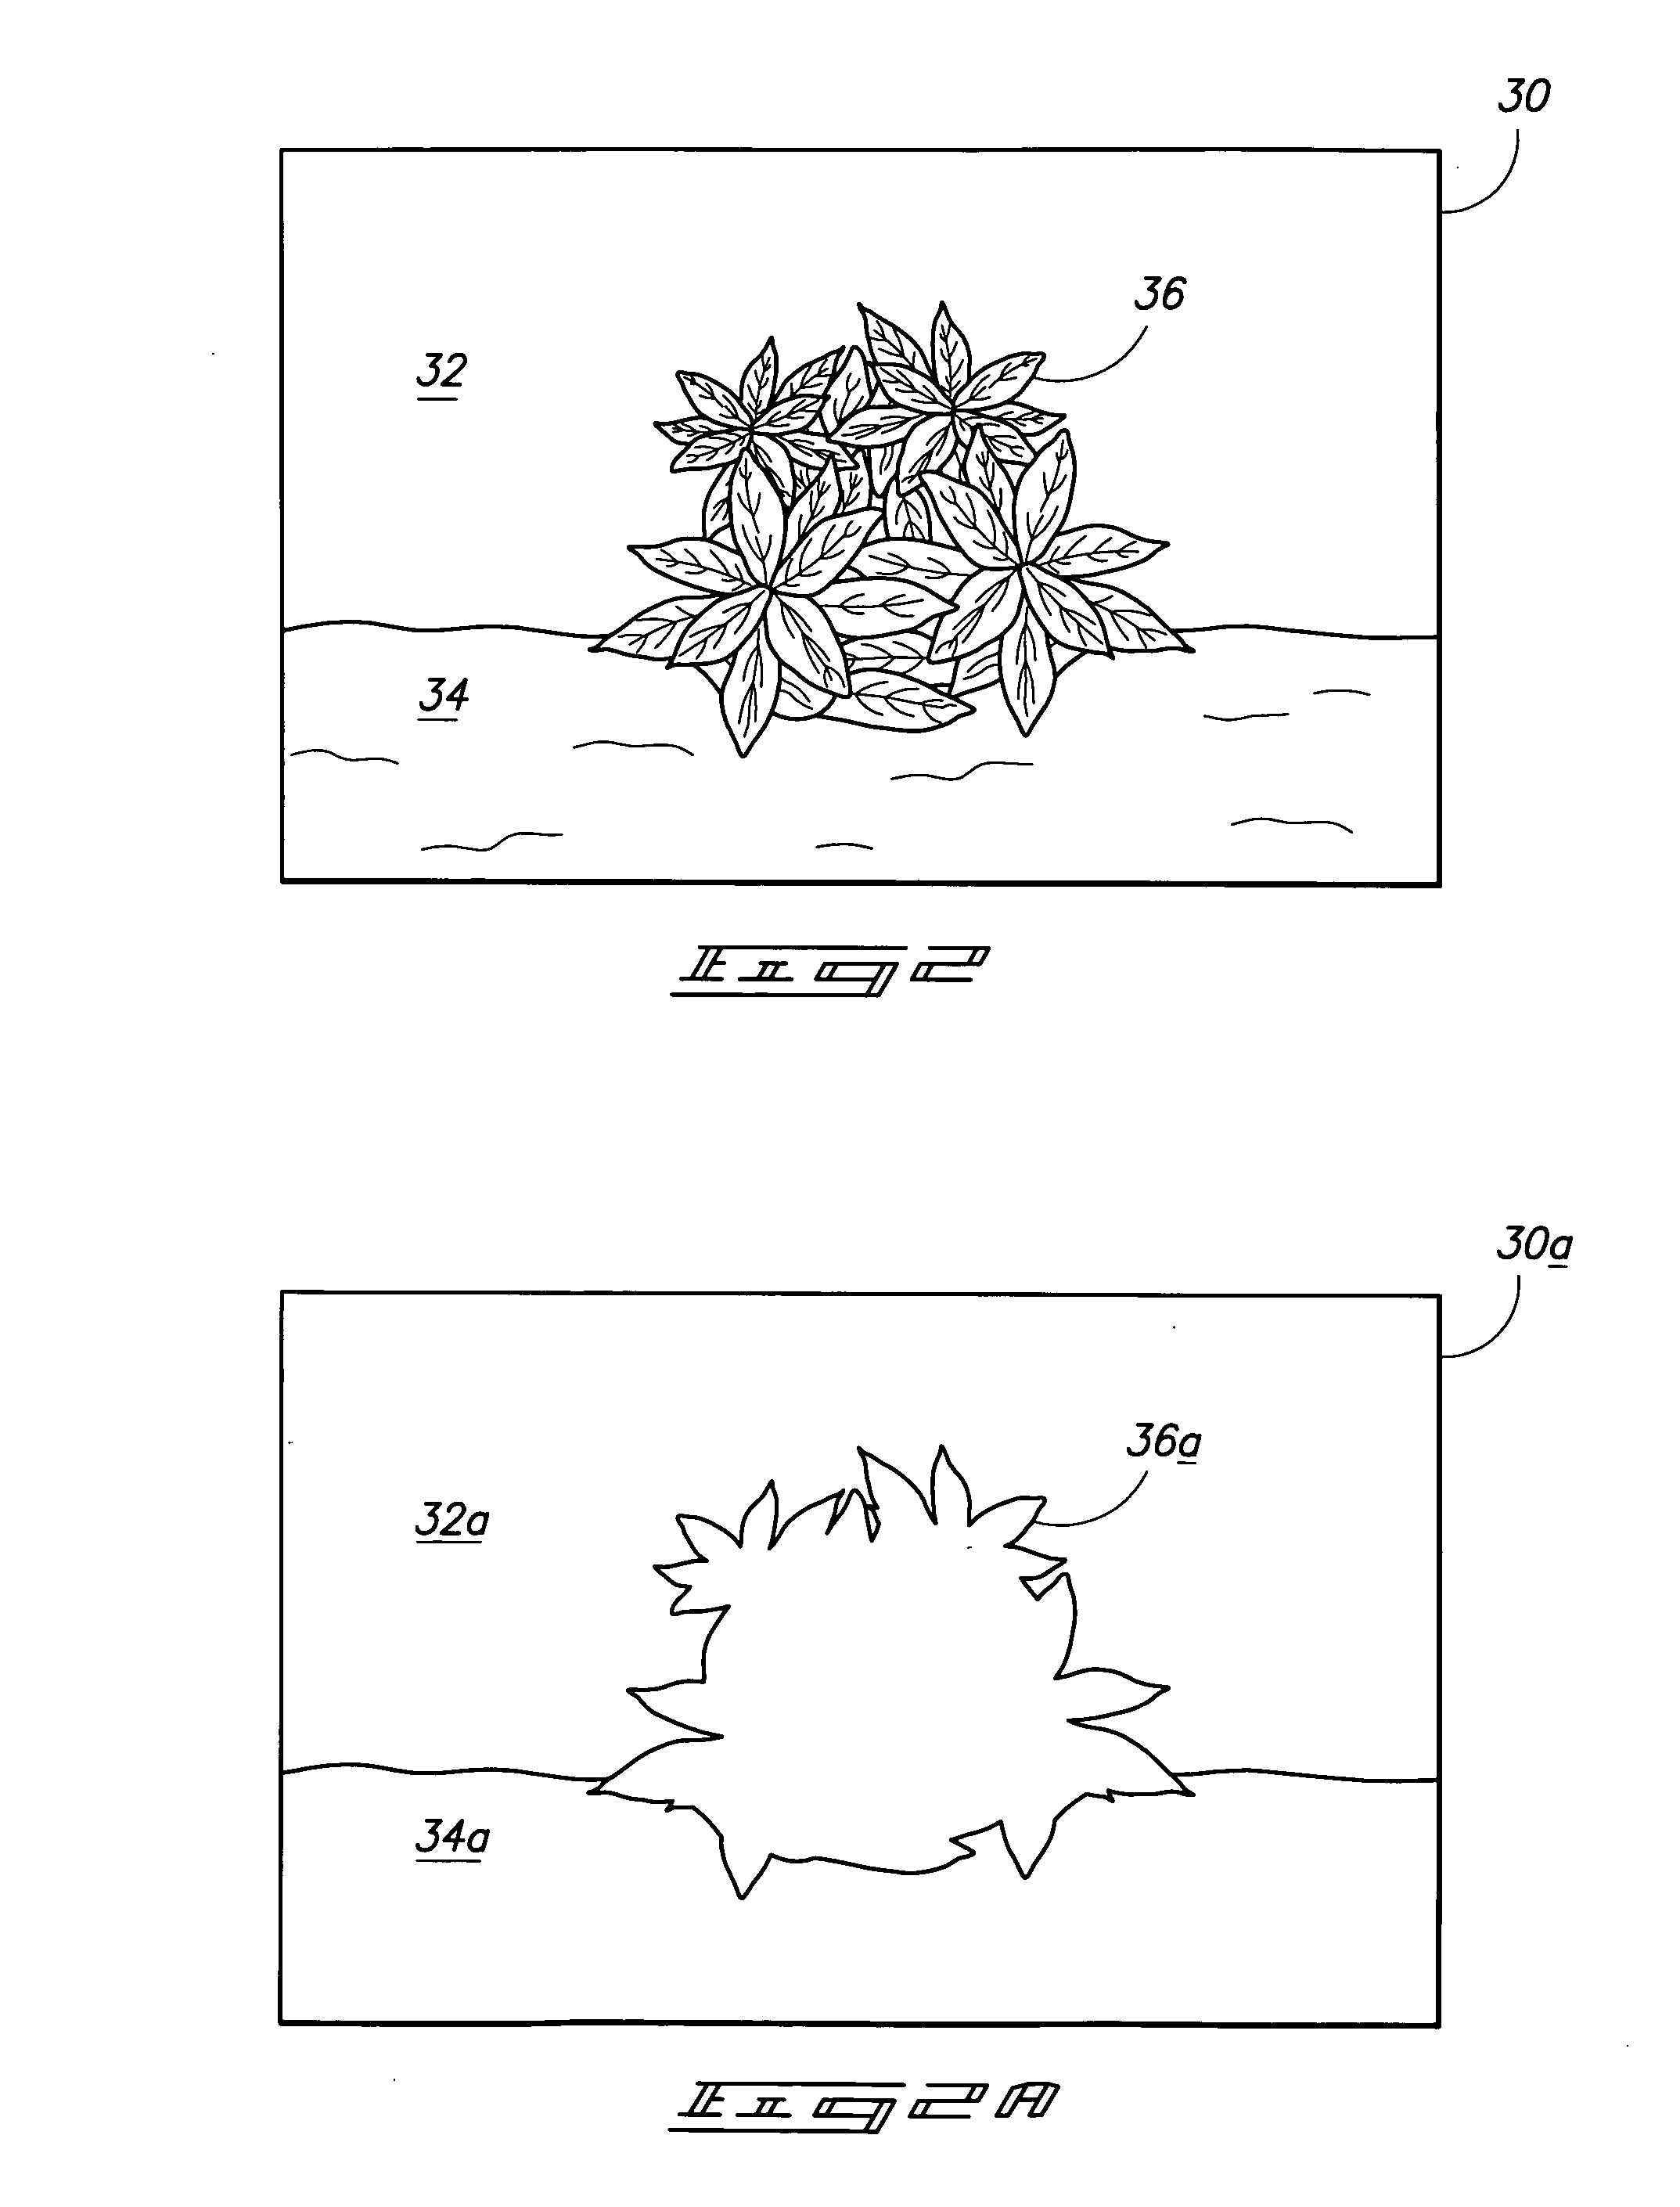 Image processing methods, image management systems, and articles of manufacture